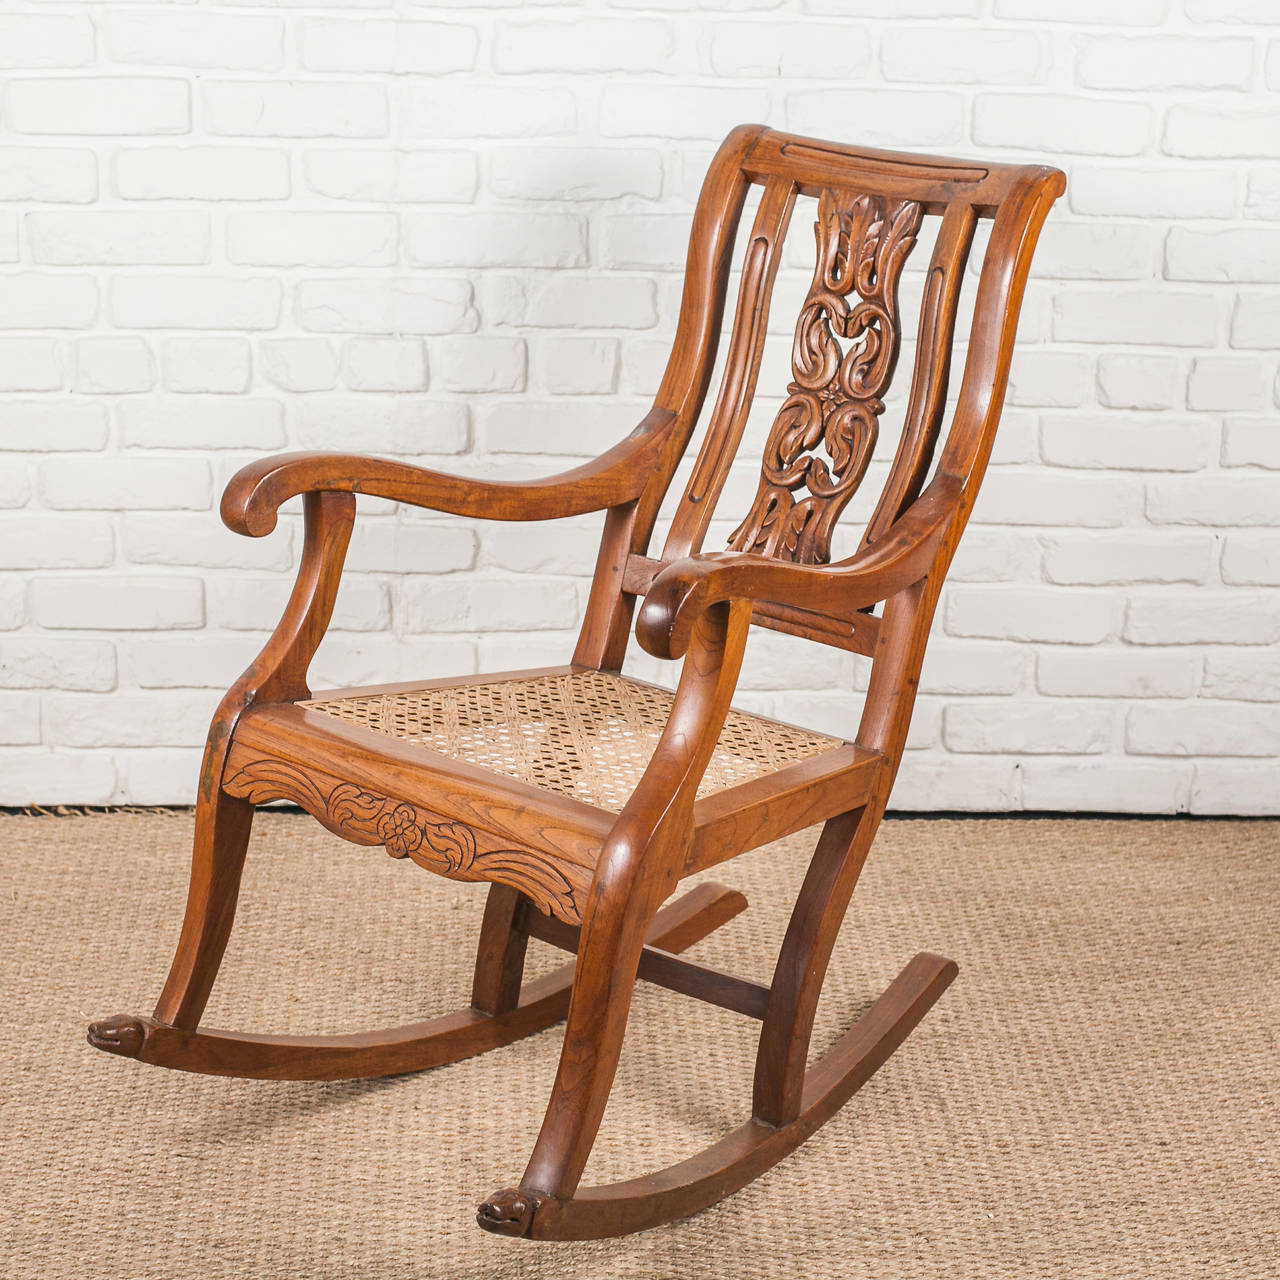 Indo-Portuguese rocking chair in solid teak with carved back and front stretcher. Dog heads carved on front of legs.